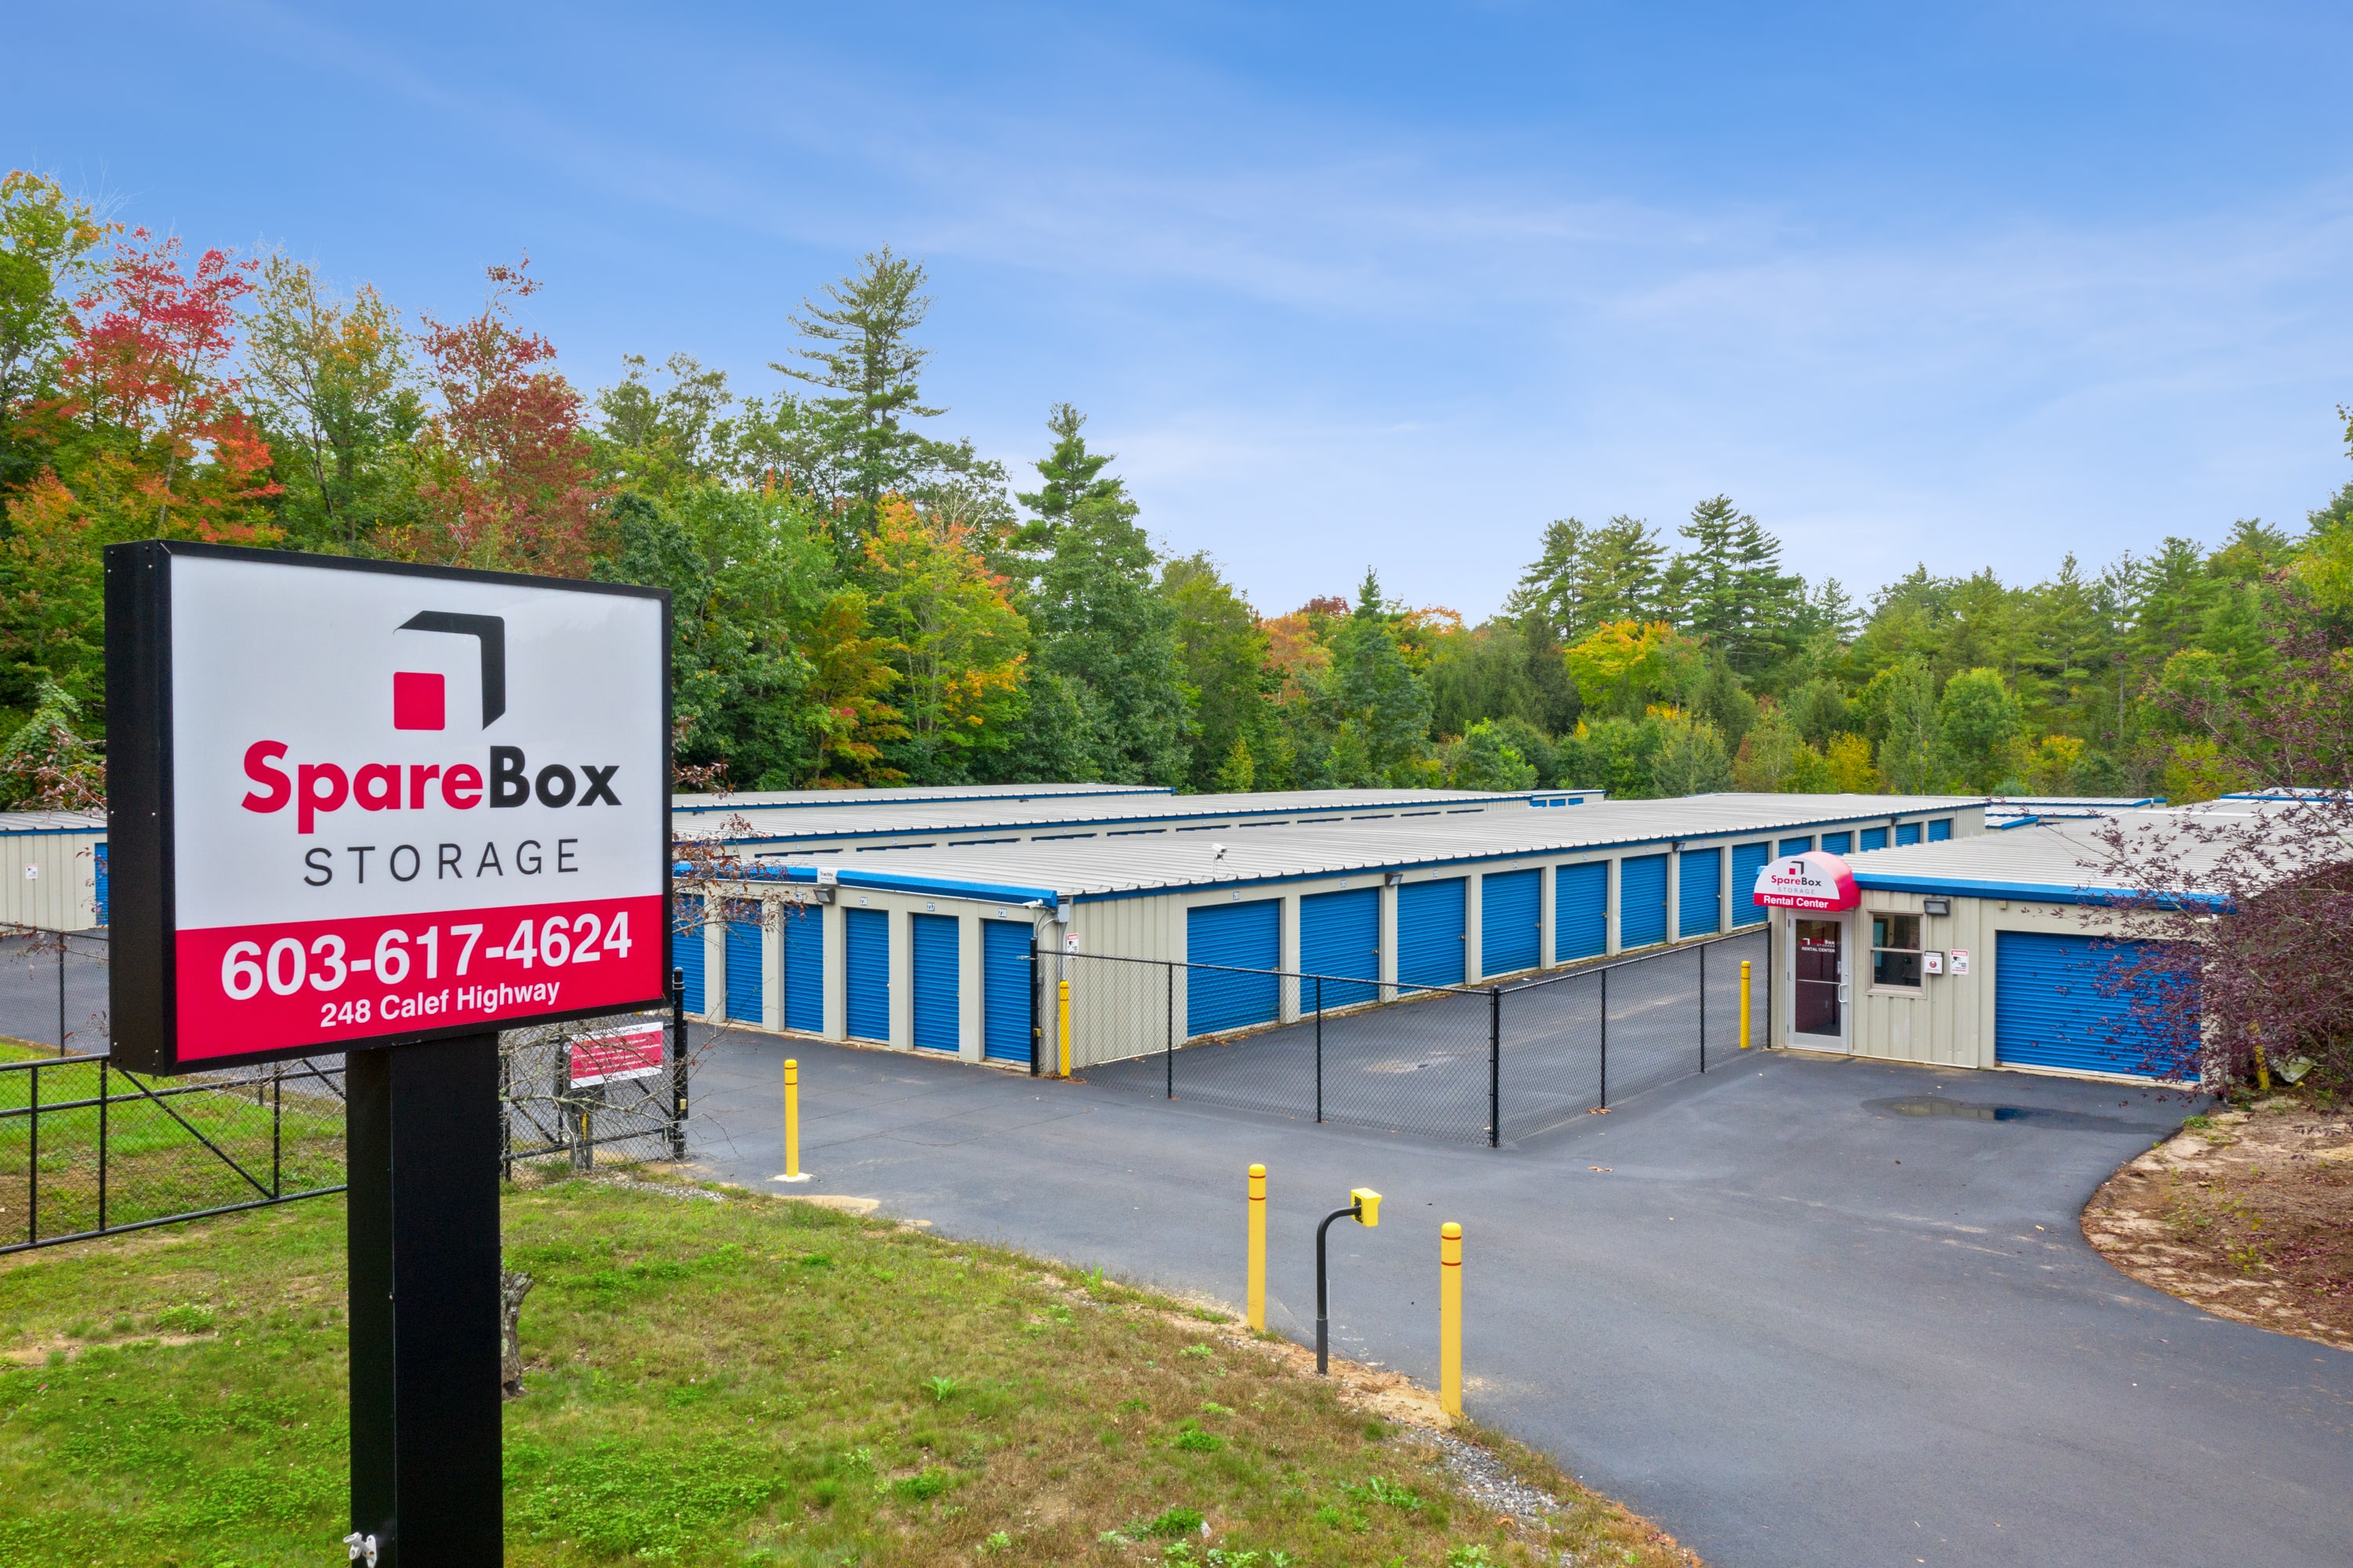 SpareBox has Barrington storage units and we make it easy to get moved in | SpareBox Storage